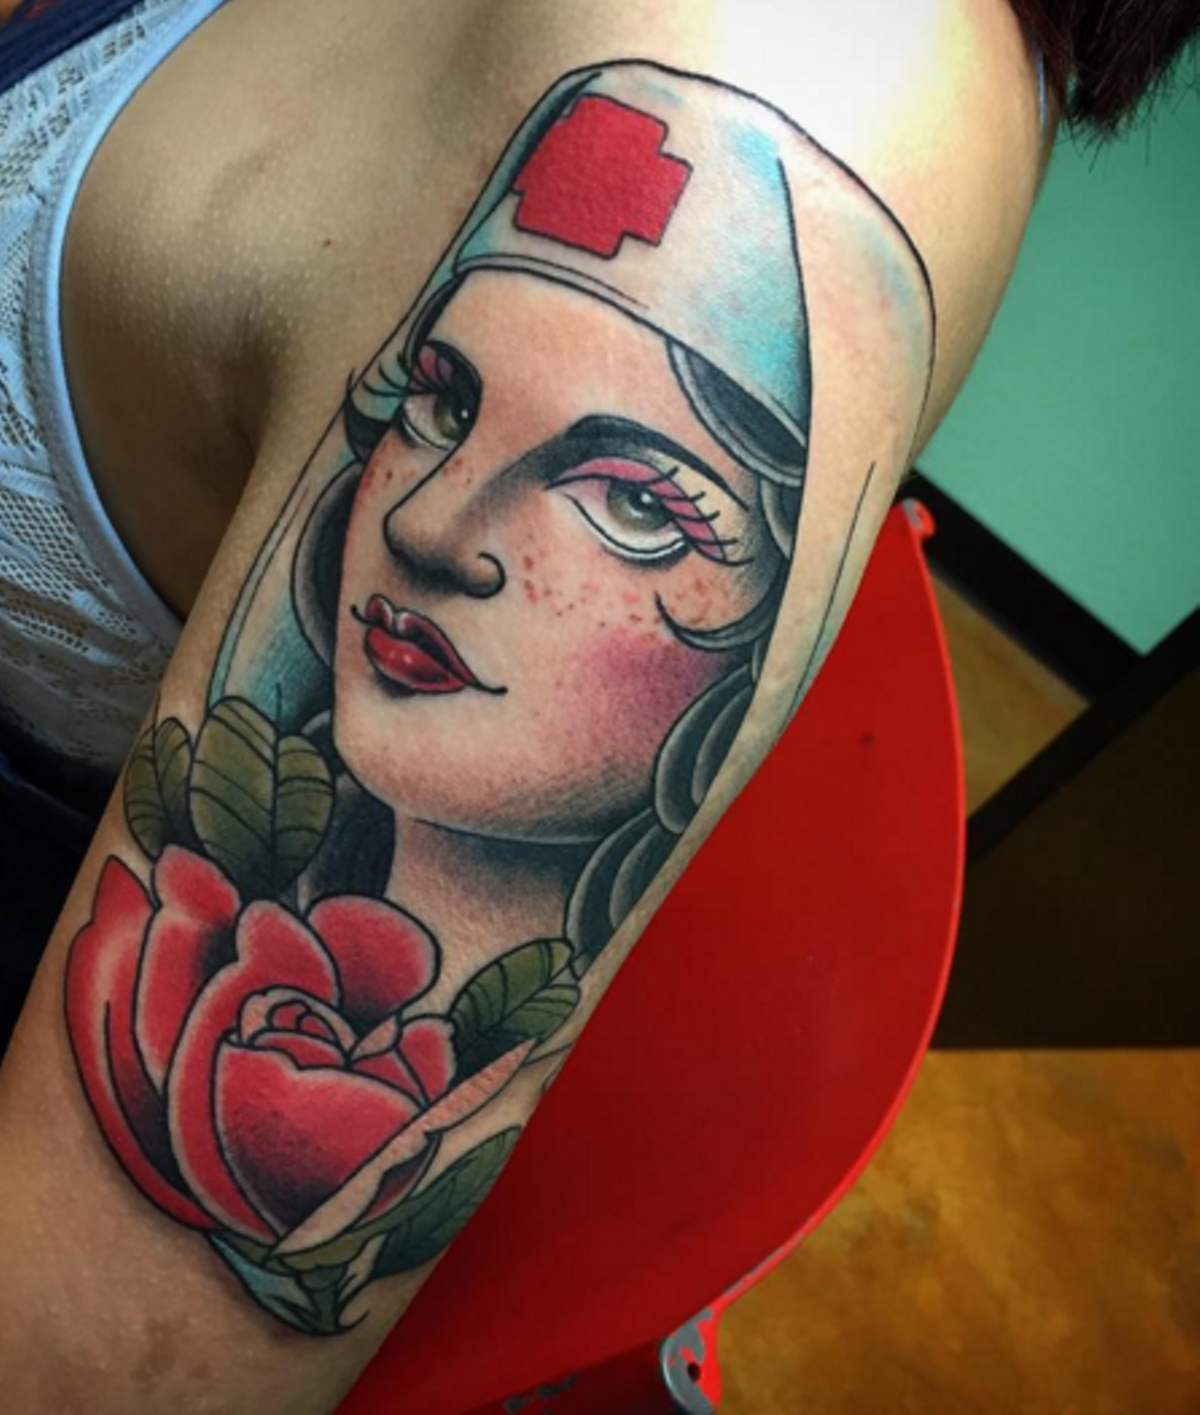 11 San Antonio Tattoo Artists You Should Be Following on Instagram